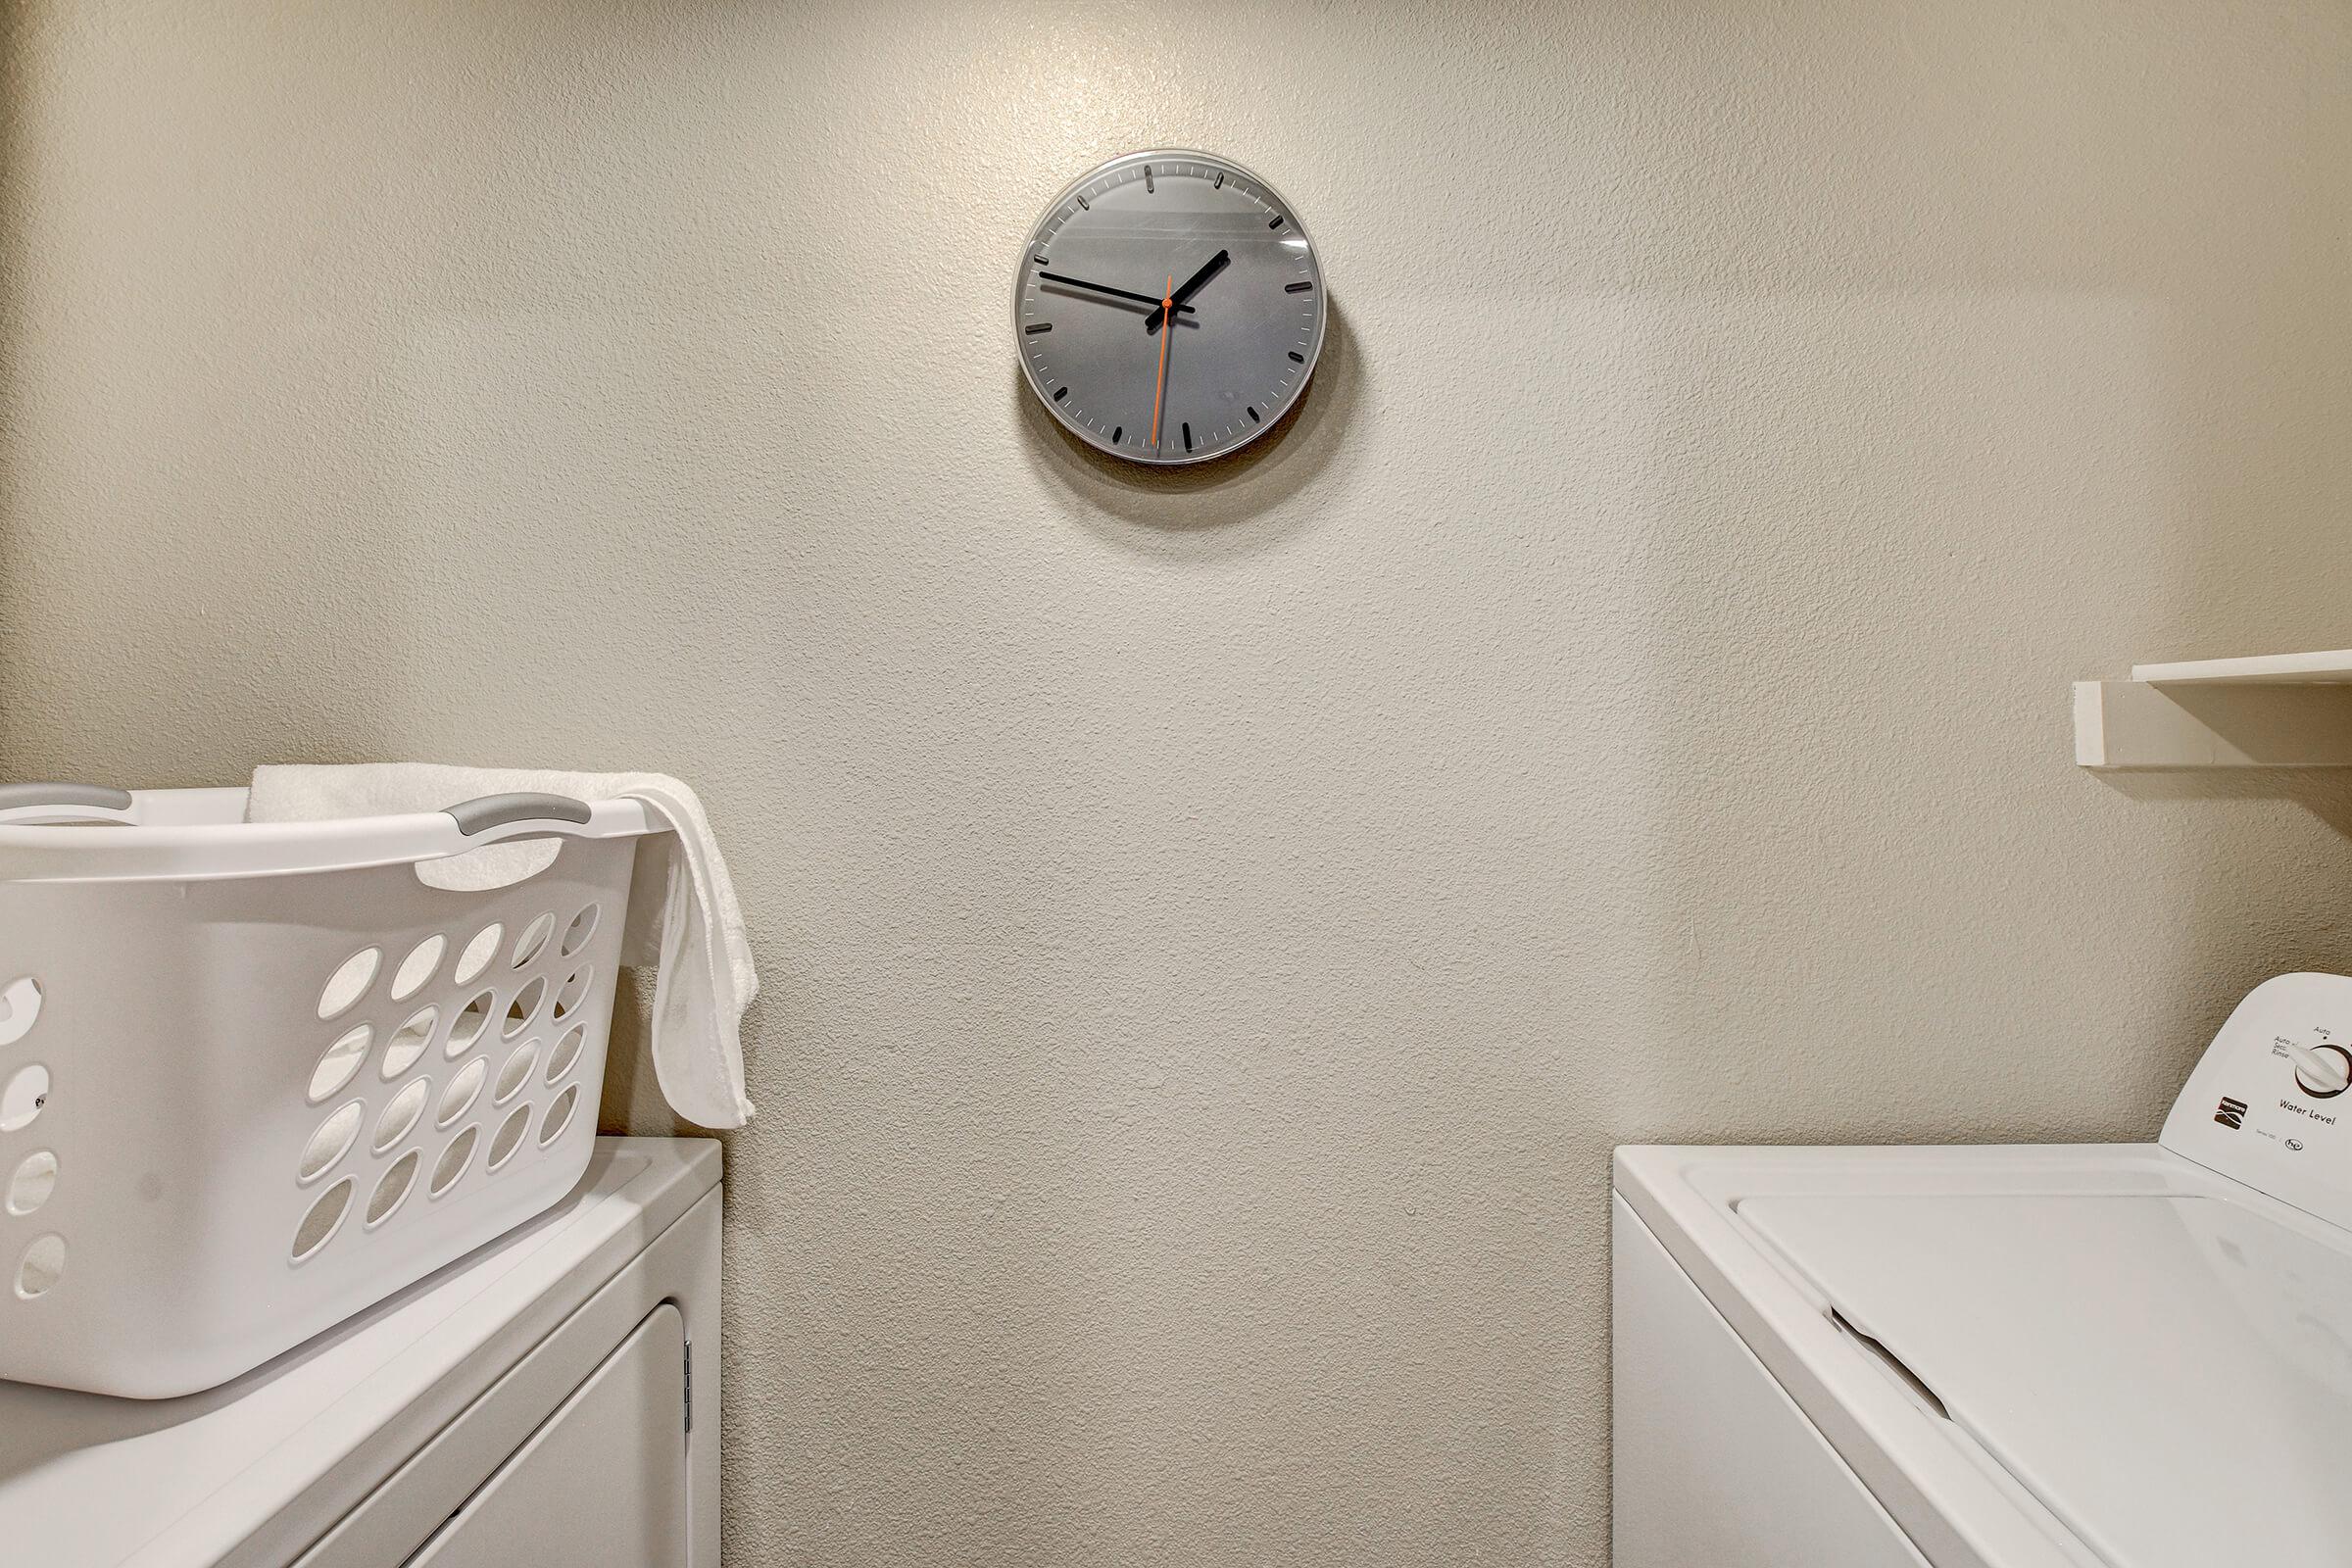 a clock sitting in front of a mirror posing for the camera